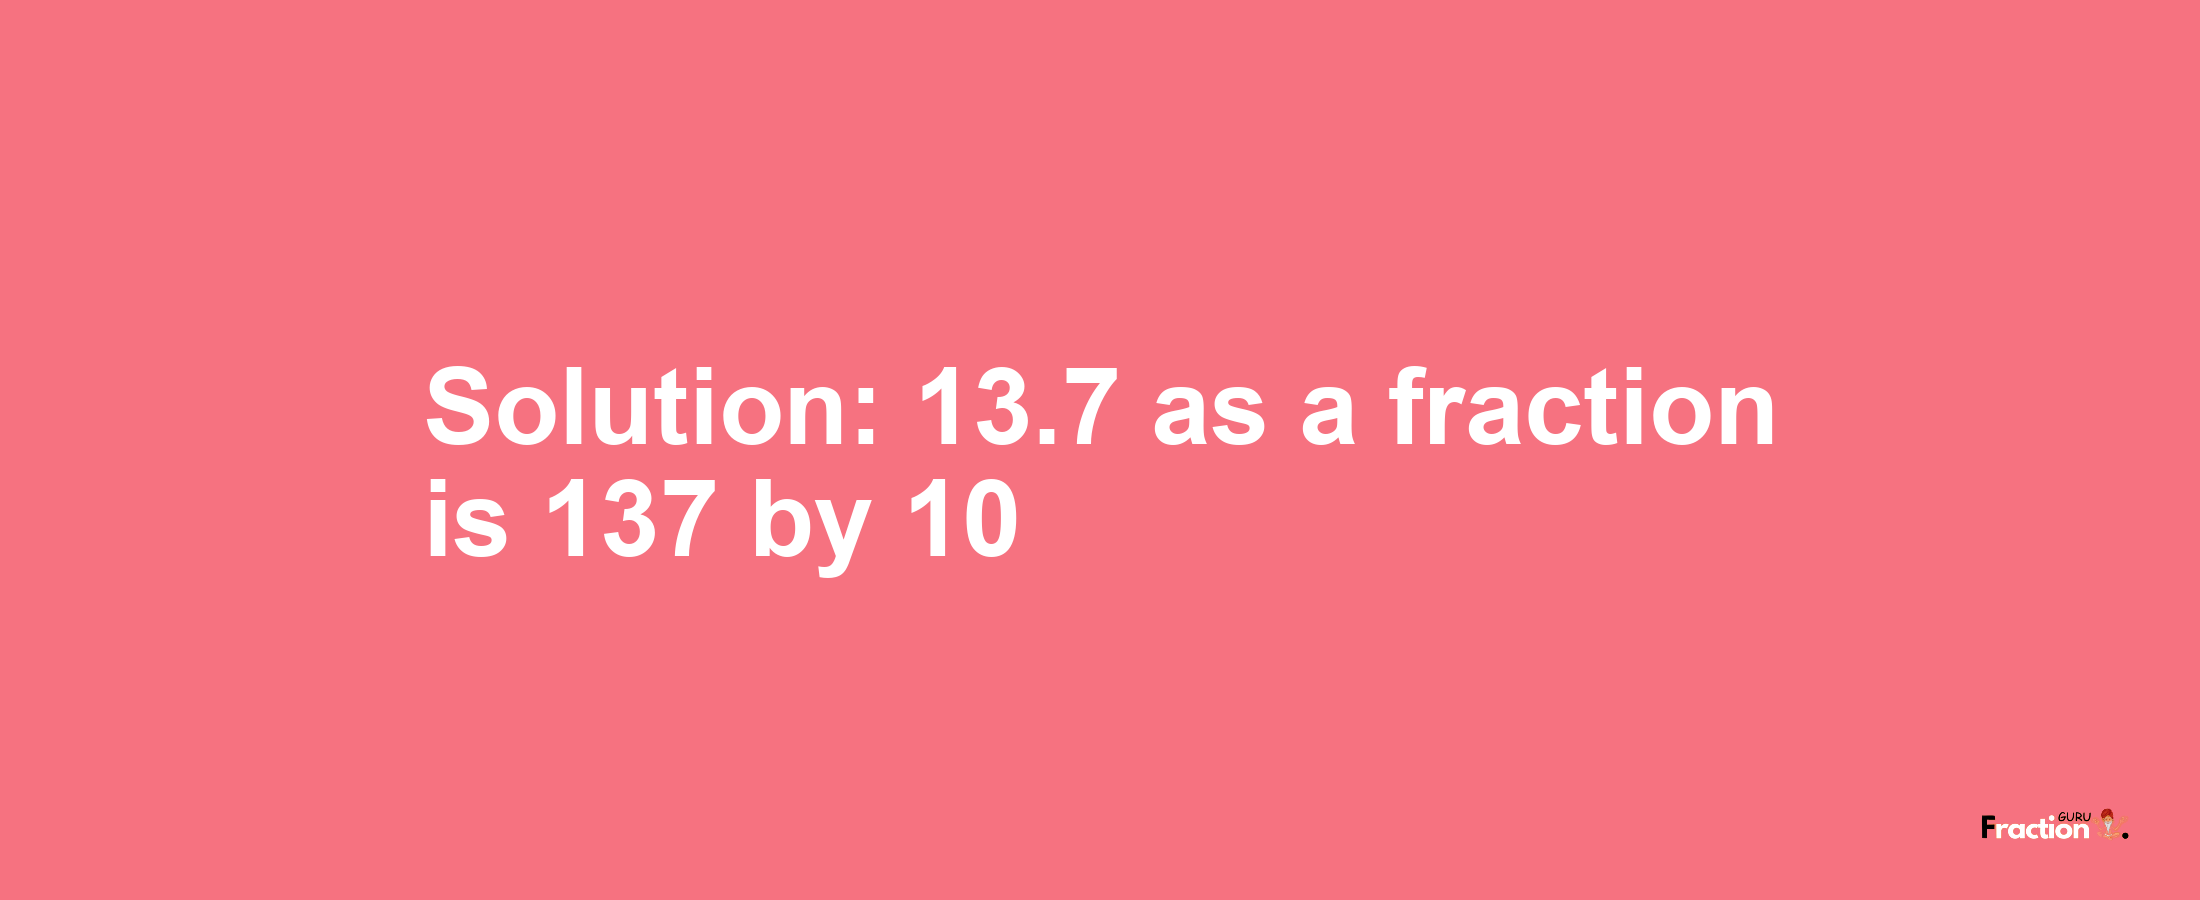 Solution:13.7 as a fraction is 137/10